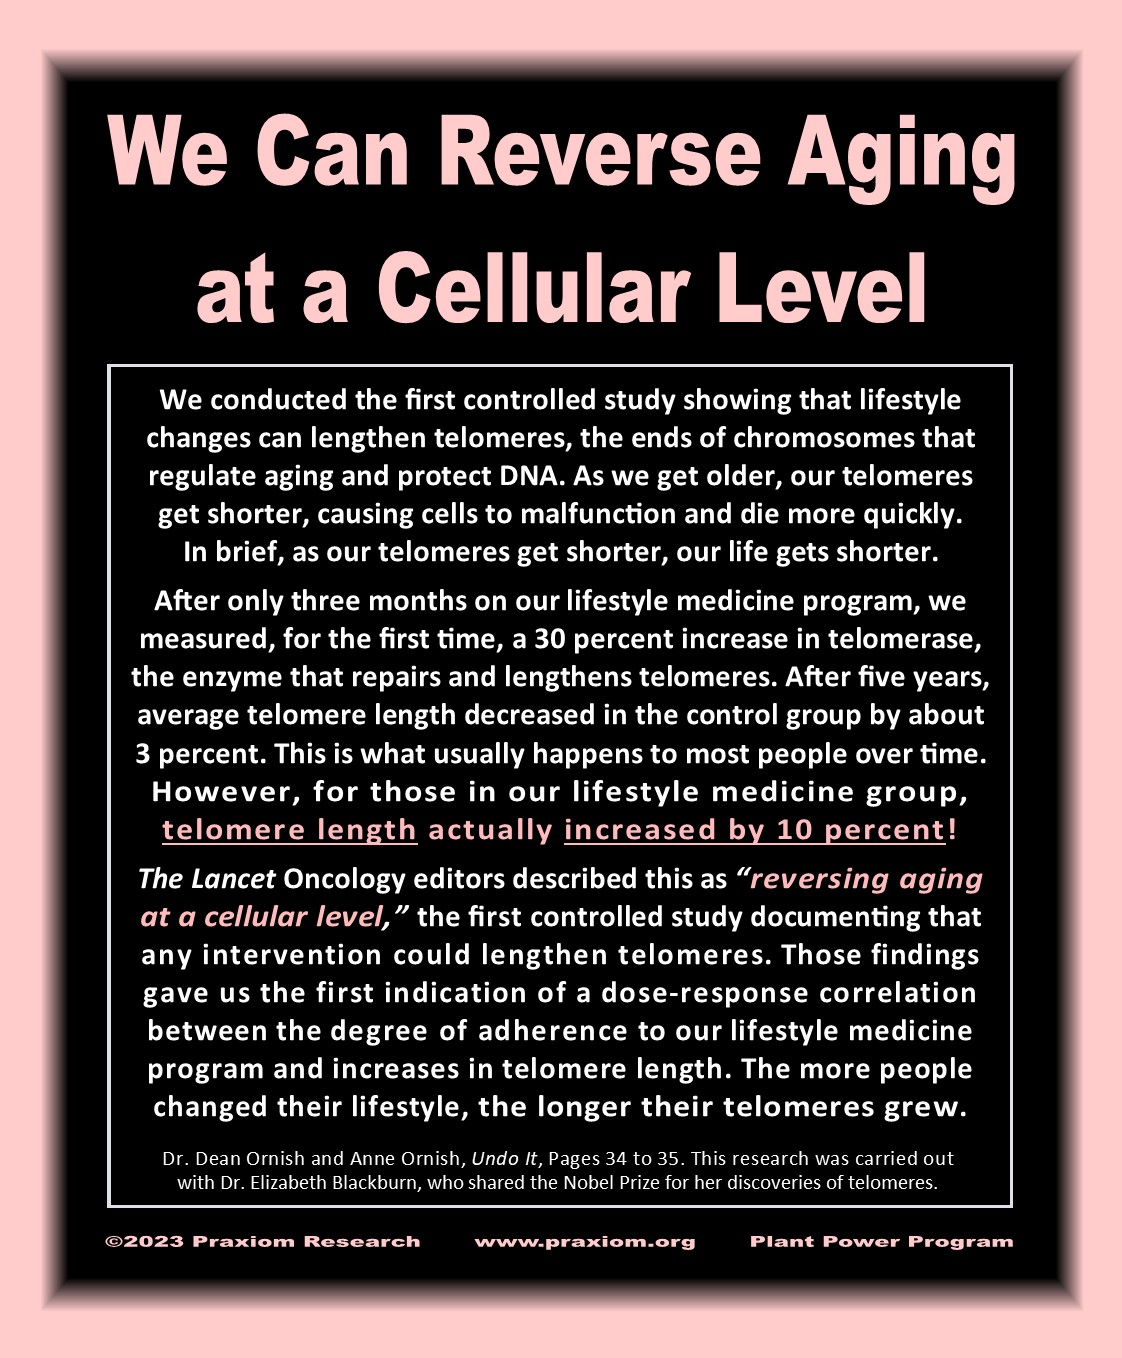 We Can Reverse Aging at a Cellular Level - Dr. Dean Ornish